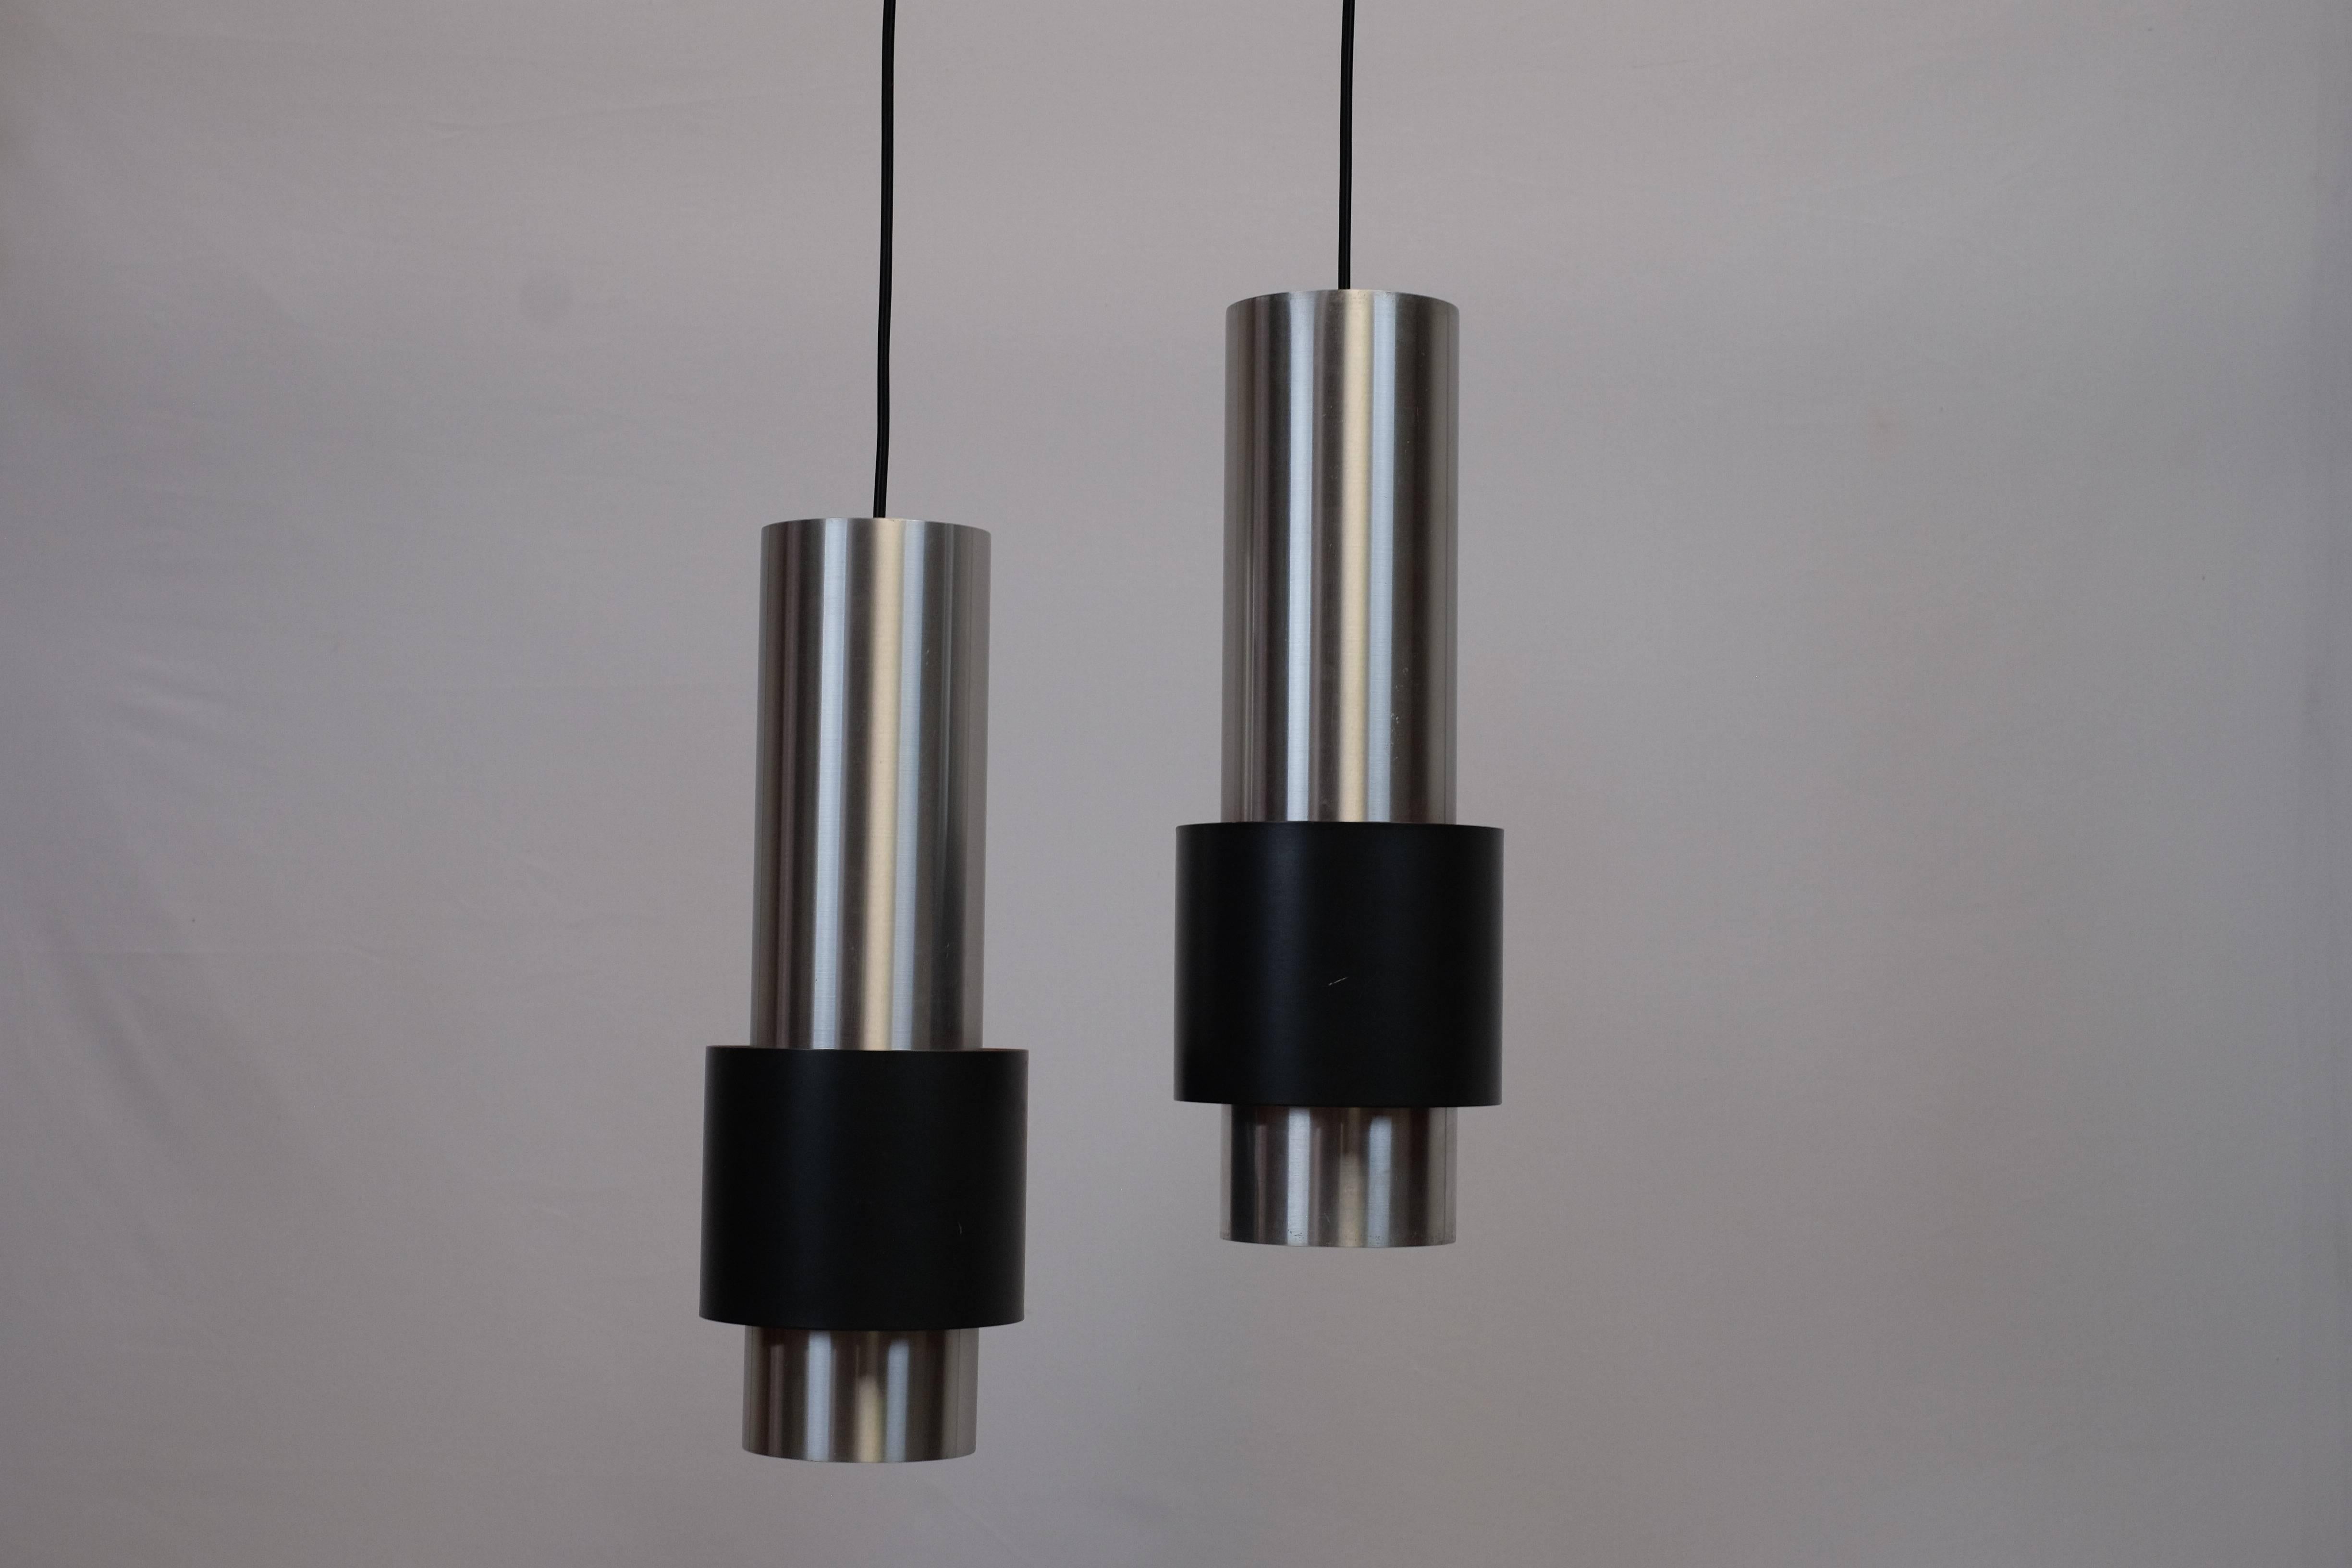 Mid-20th Century Pair of Zenith Lamps Designed by Jo Hammerborg, Produced by Fog & Mørup in 1967